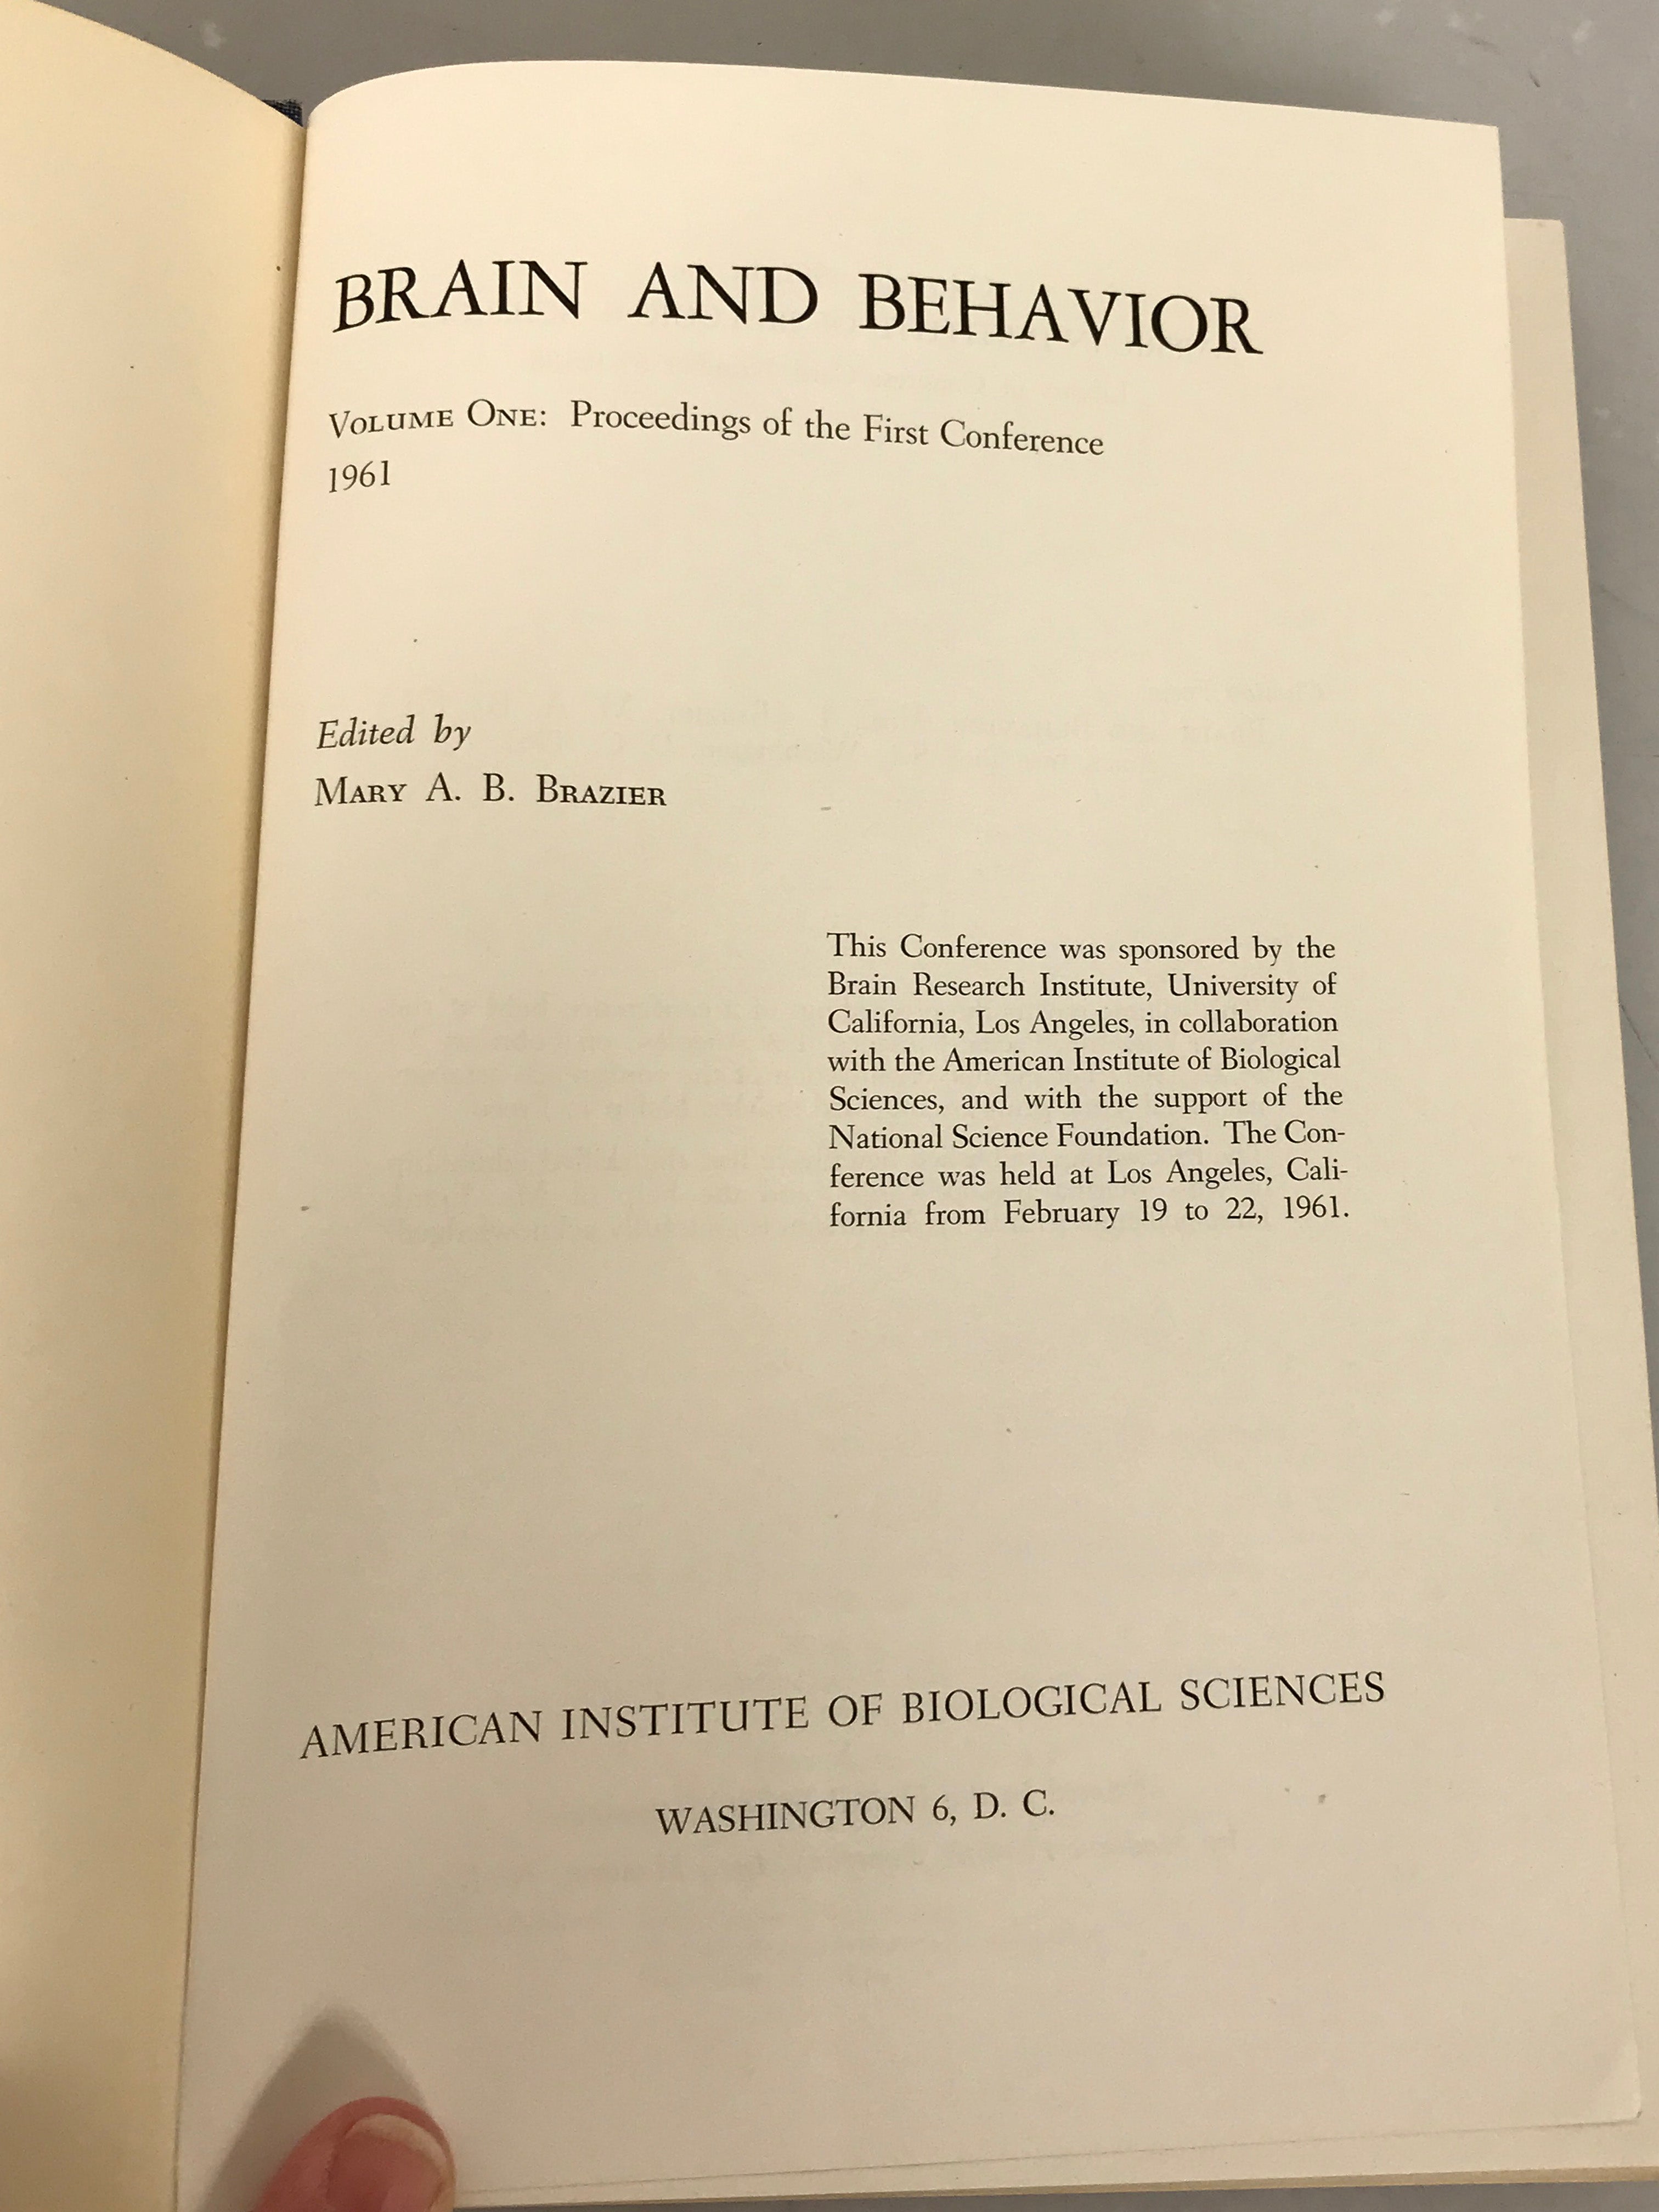 Lot of 2 Mary A.B. Brazier Books: The Electrical Activity of the Nervous System Third Edition (1968) and Brain and Behavior First Conference (1961)  HC DJ